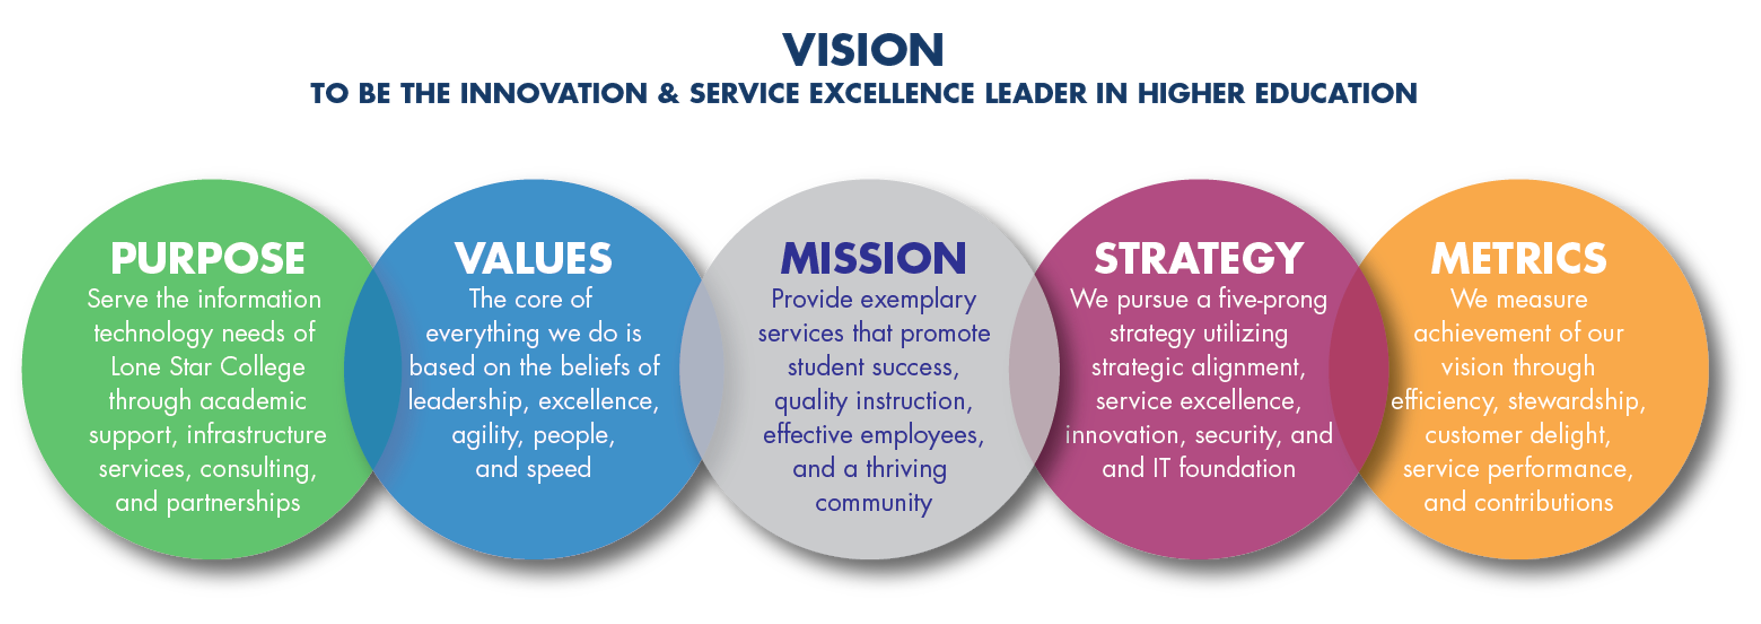 VISION - TO BE THE INNOVATION & SERVICE EXCELLENCE LEADER IN HIGHER EDUCATION; MISSION - Provide exemplary services that promote student success, quality instruction, effective employees, and a thriving community.; PURPOSE - Serve the information technology needs of Lone Star College.; VALUES - Leadership Excellence Agility People Speed; STRATEGY - Strategic Alignment Service Excellence Innovation Security IT Foundation; METRICS - Efficiency Stewardship Customer Delight Service Performance Contributions